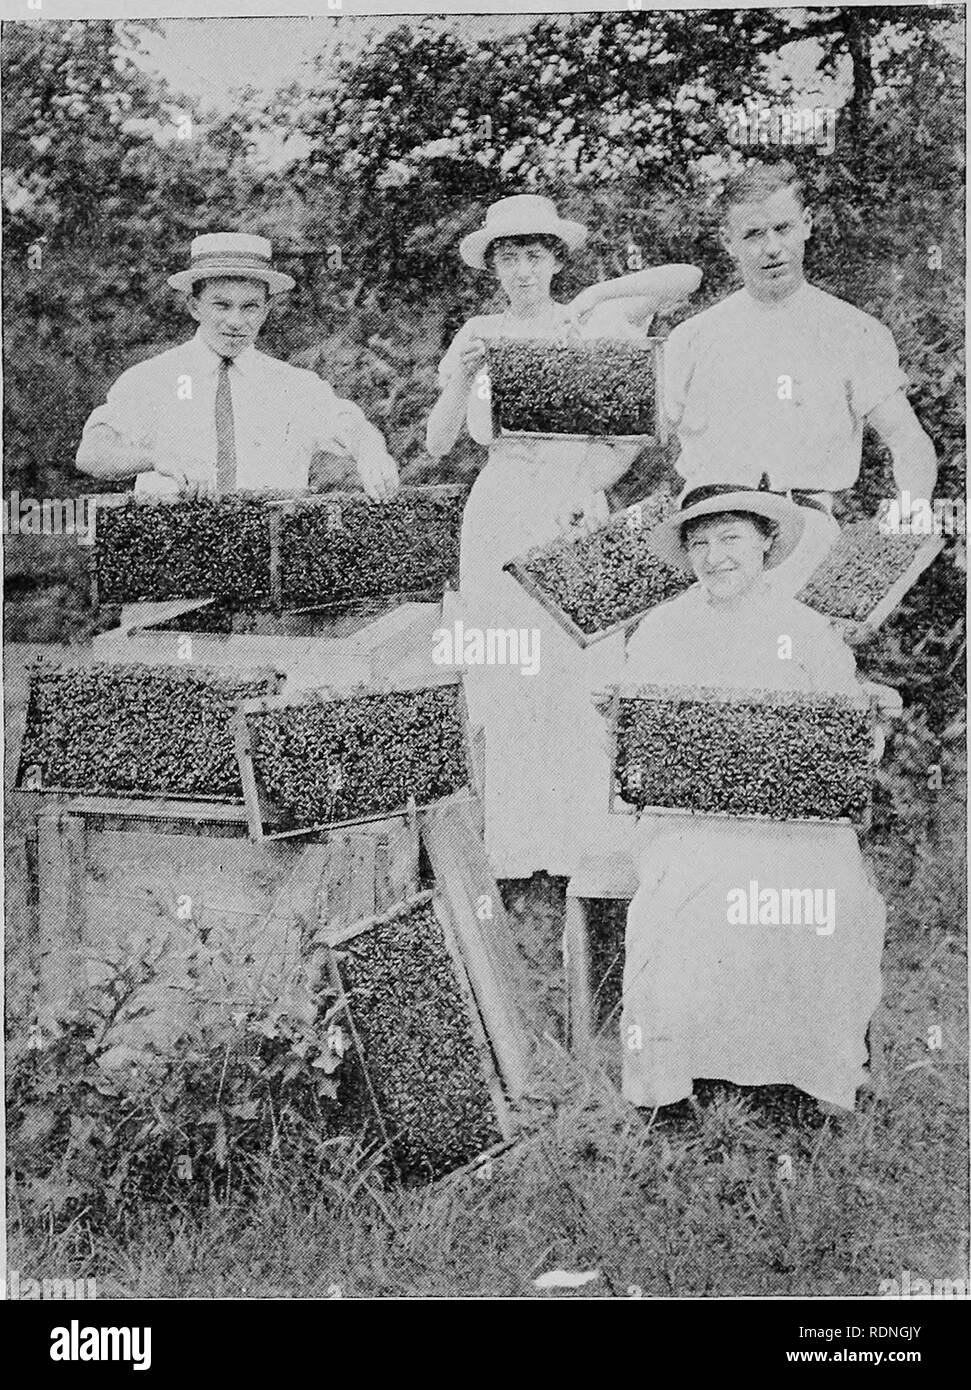 . Bee keeping. April 1919. To the disabled soldiers, sailors, and marines. To aid them in choosing a vocation. Bees. 8 ployed in the household in general cooking, as well as in canning and in the baking of many desirable kinds of bread, and numerous varieties When used in sweetening tea and Opportunity Monographs. itleresffin how ^^ ^'^^^^^ SÂ®^^' ^^^^P^' ^^^ cookies you can &quot;carry coffee it does not cause any loss of aroma. Its recent substitution for back^homeÂ°'joti sugar is causing it again to be employed in making pies, puddings, and SSs^'^eadfng the sauces. Confectioners use honey f Stock Photo